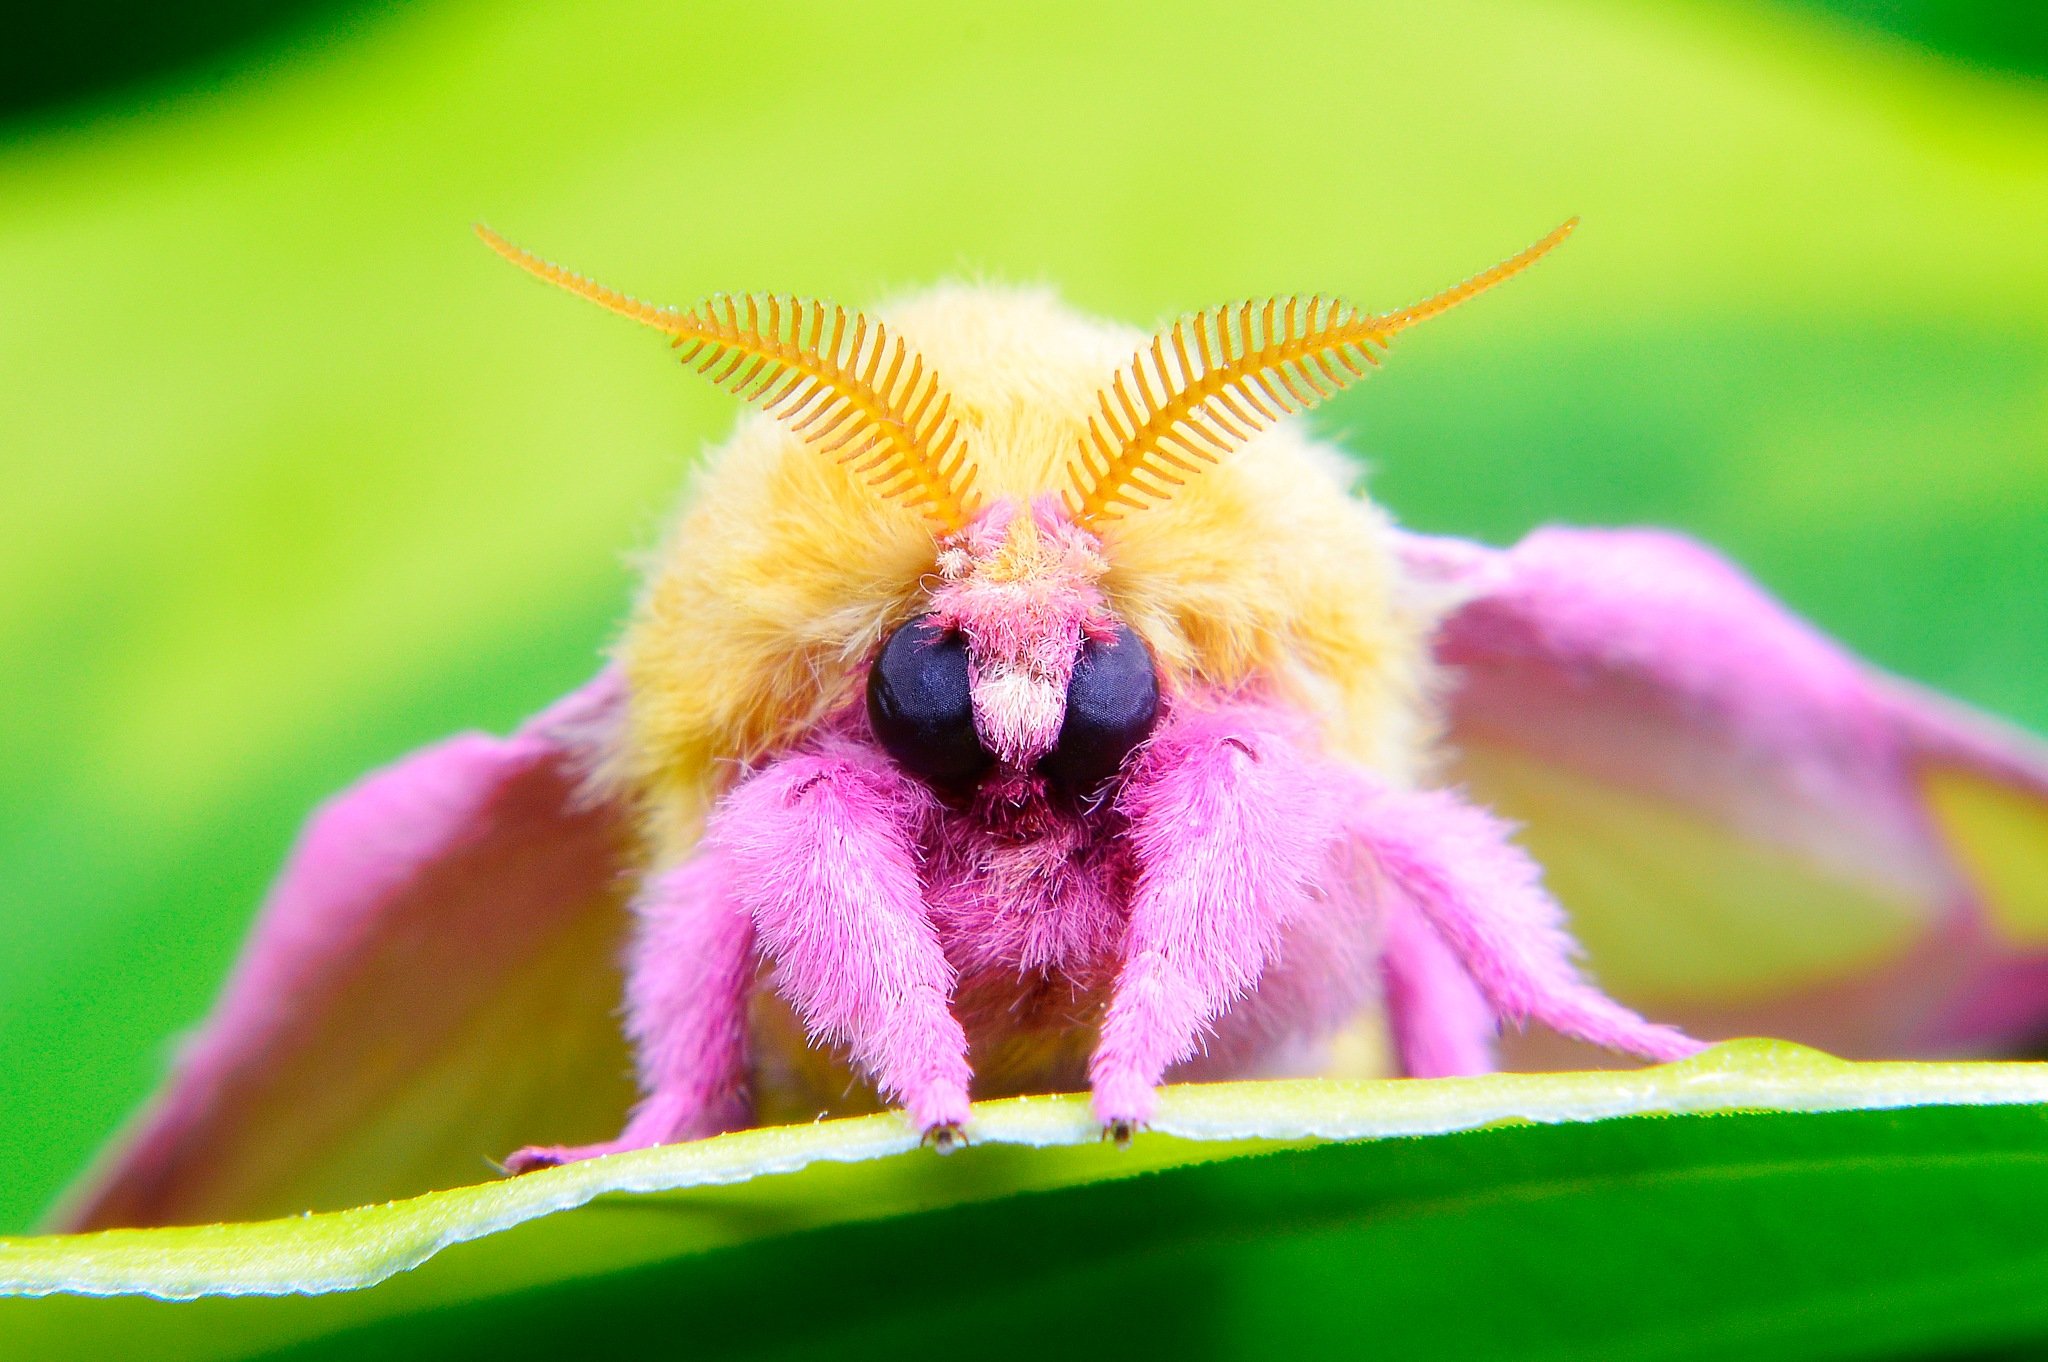 The Rosy Maple Moth by WGammon on YouPic